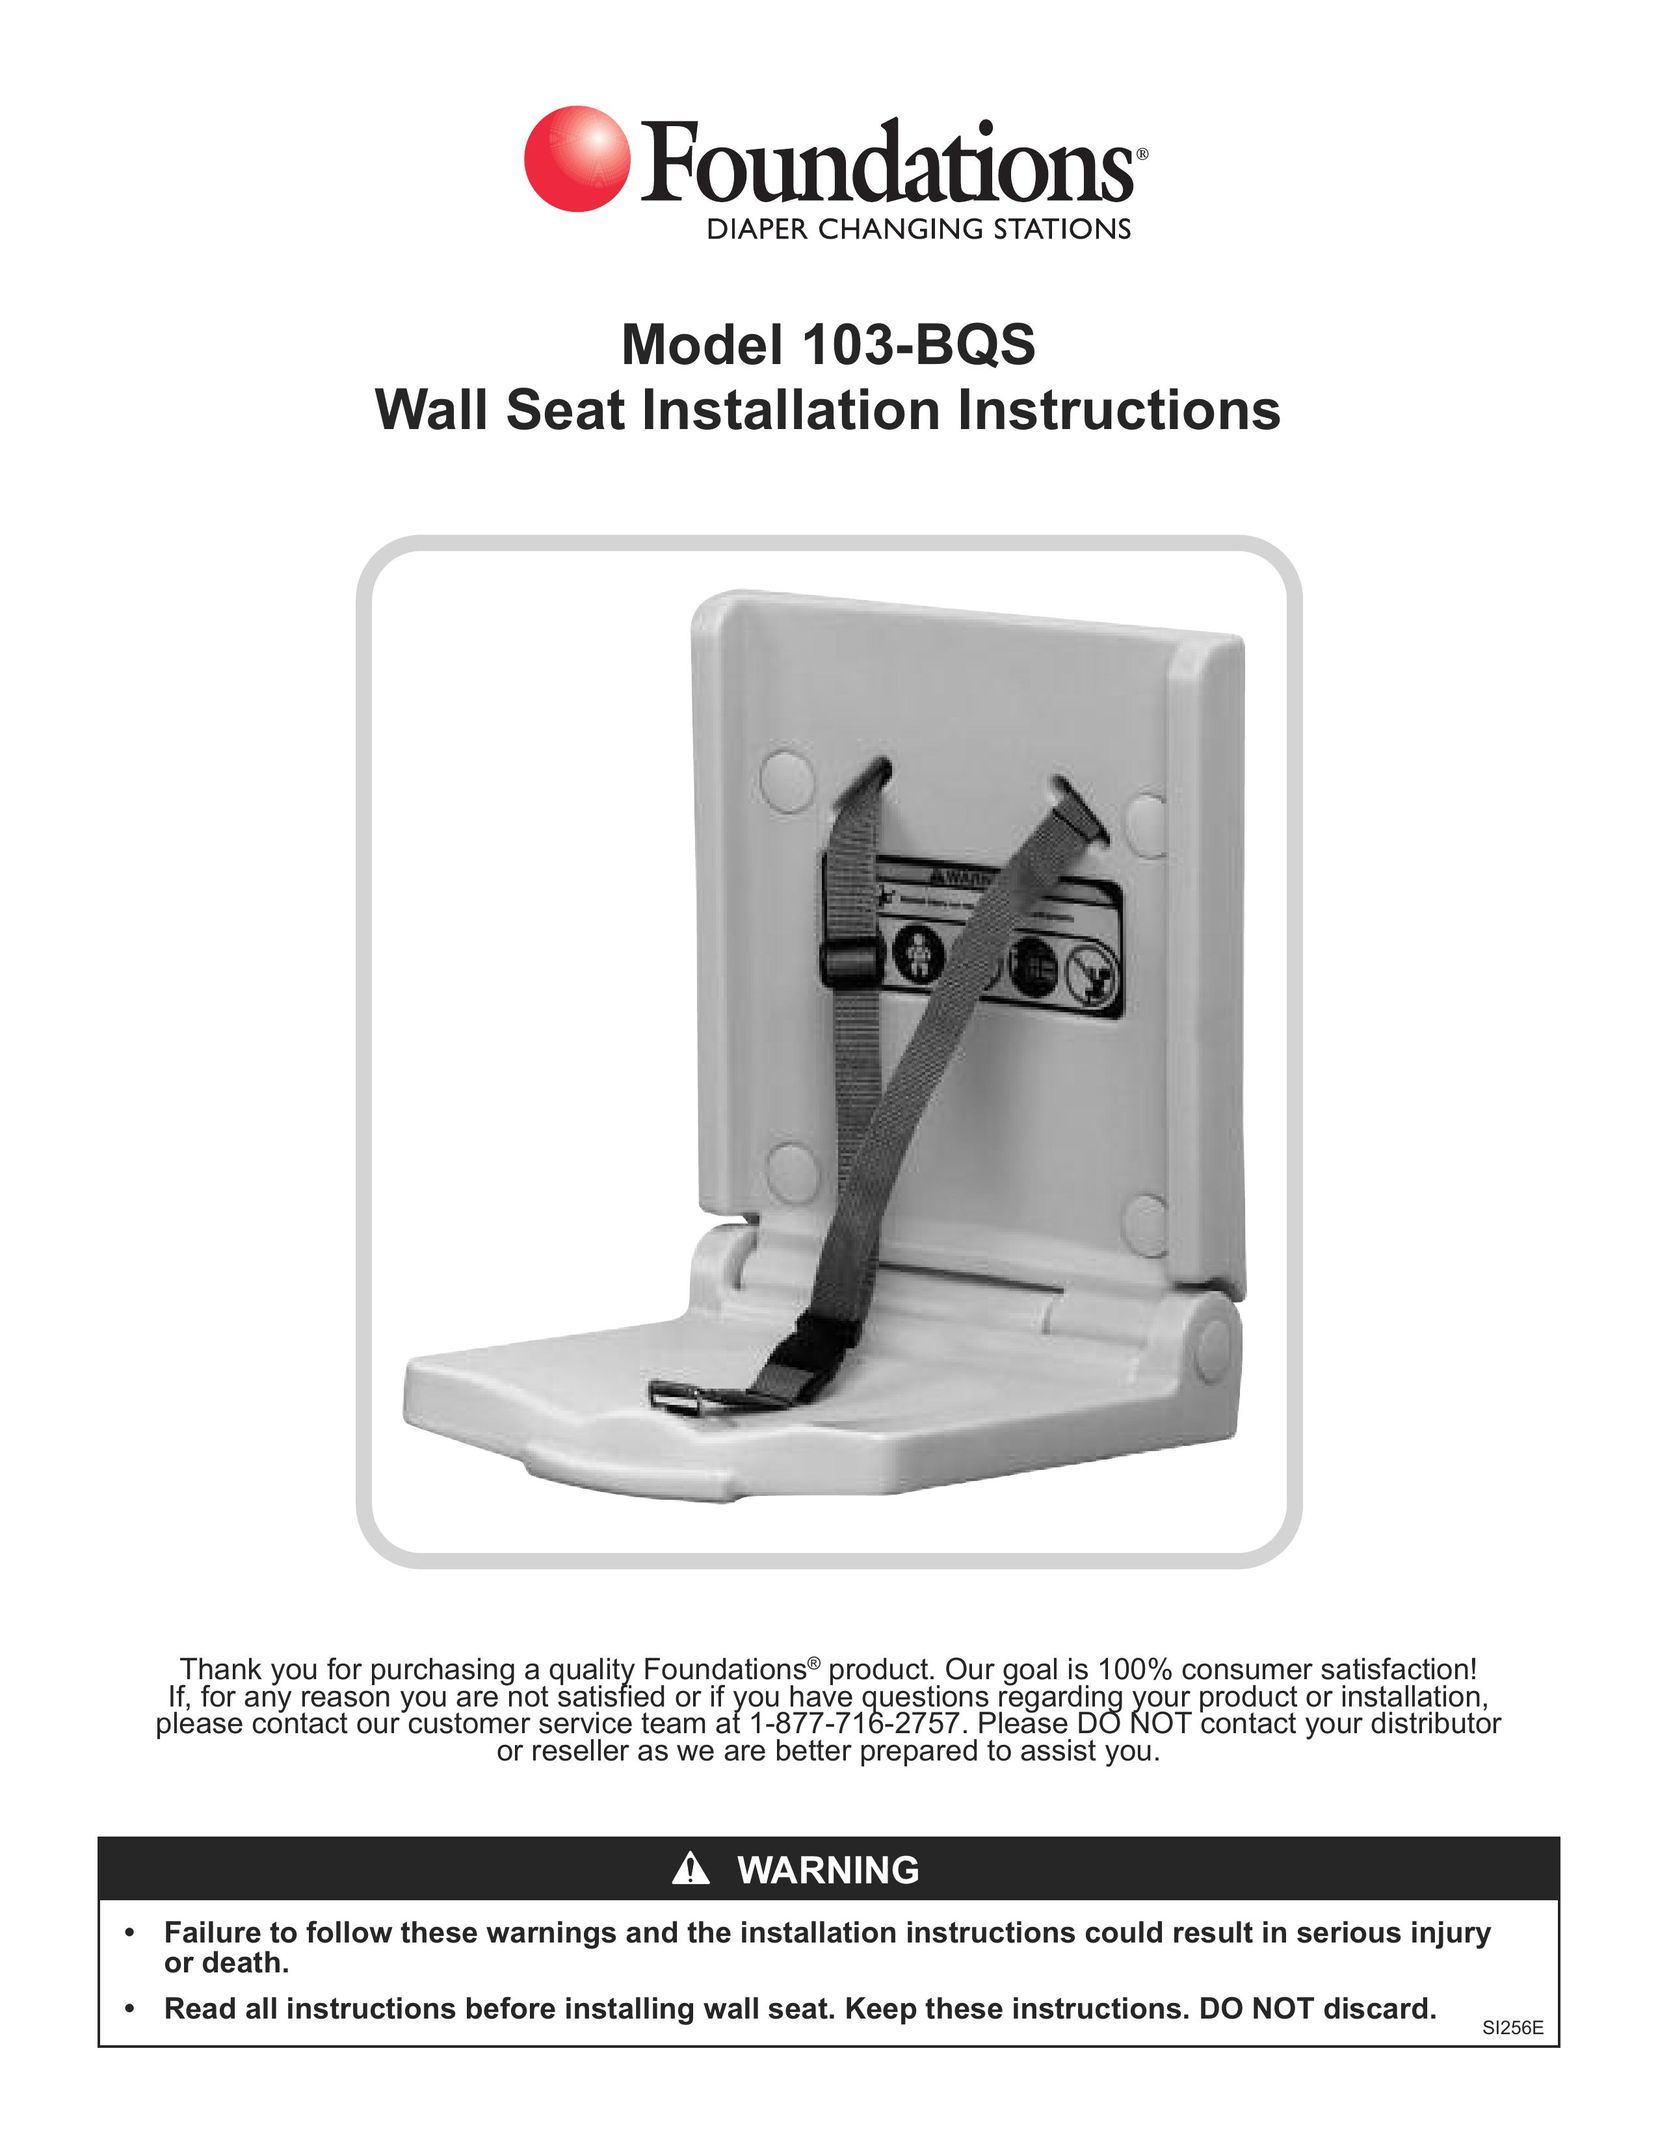 Foundations SI256E Baby Furniture User Manual (Page 1)